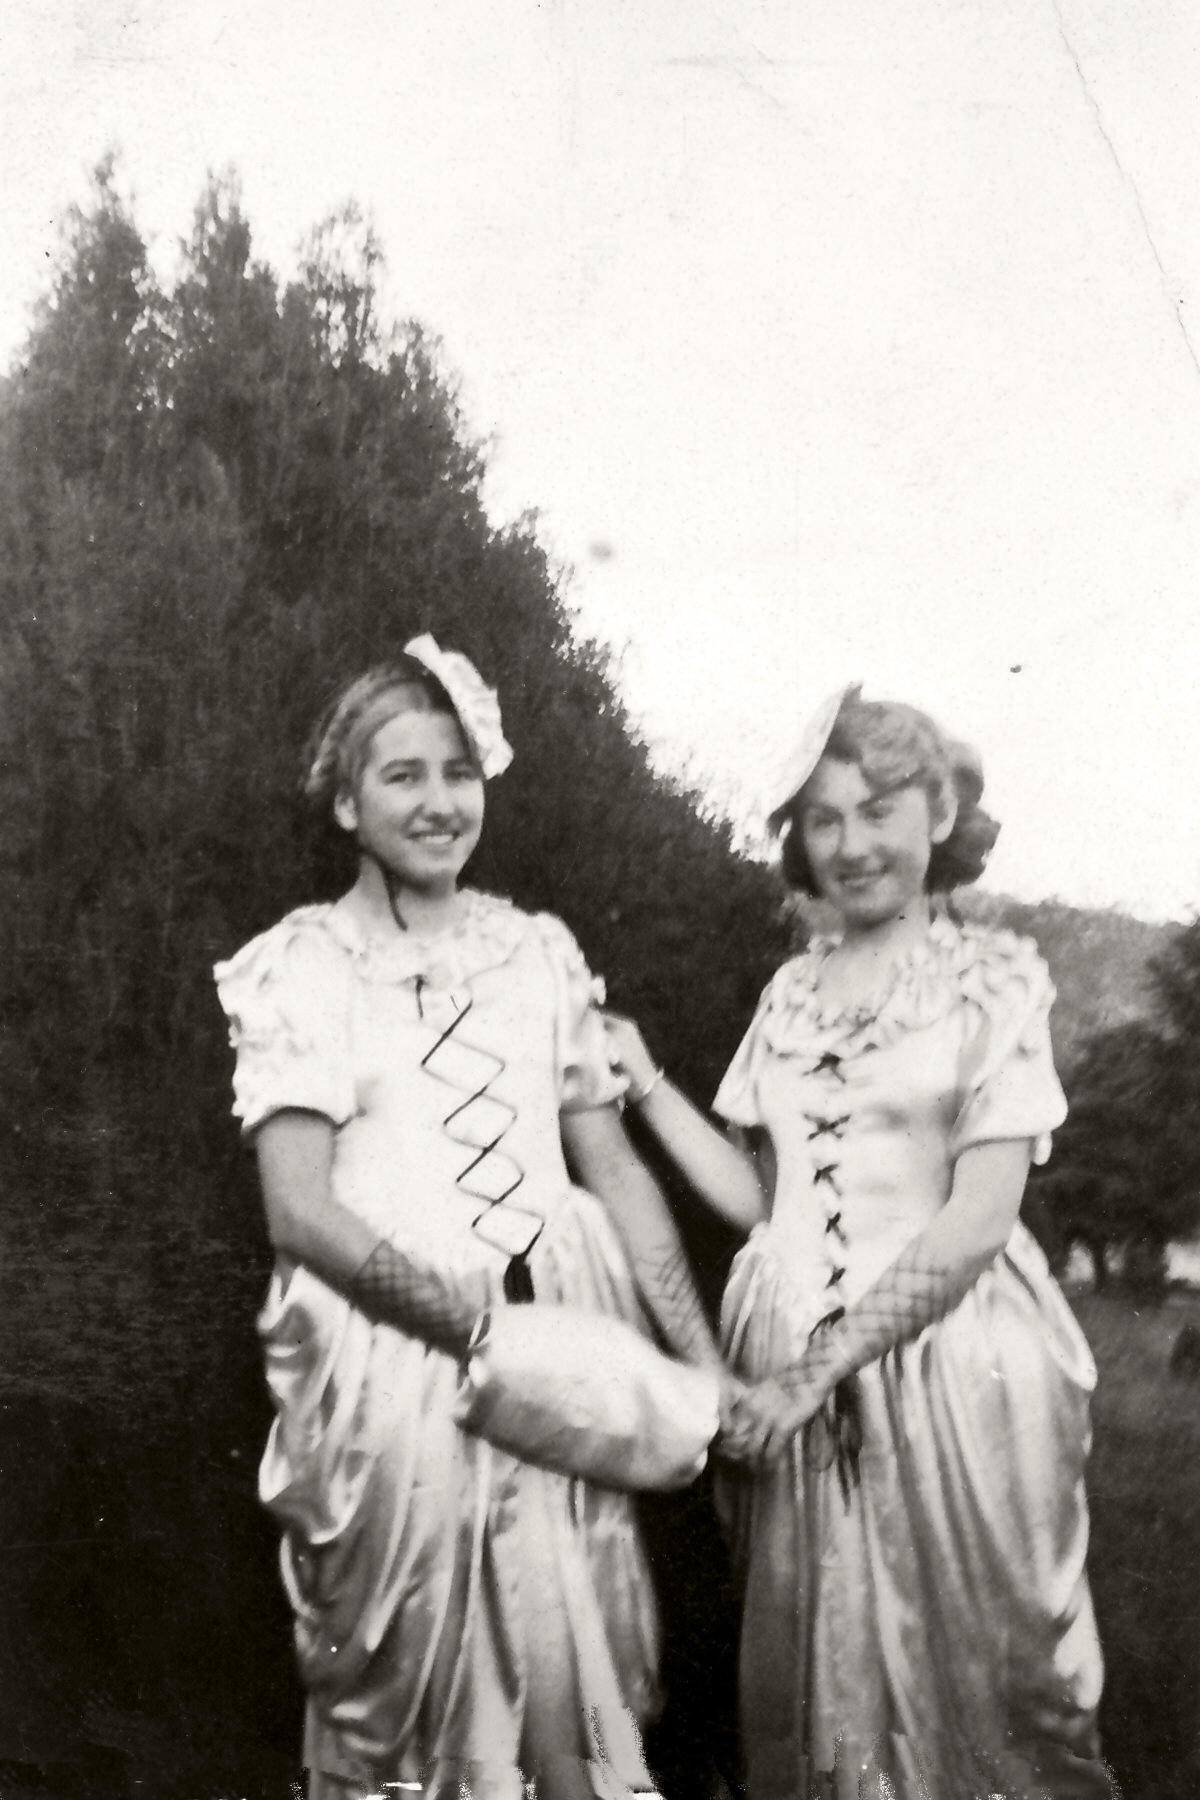 1930's Mary Carberry and Lenore Burchill